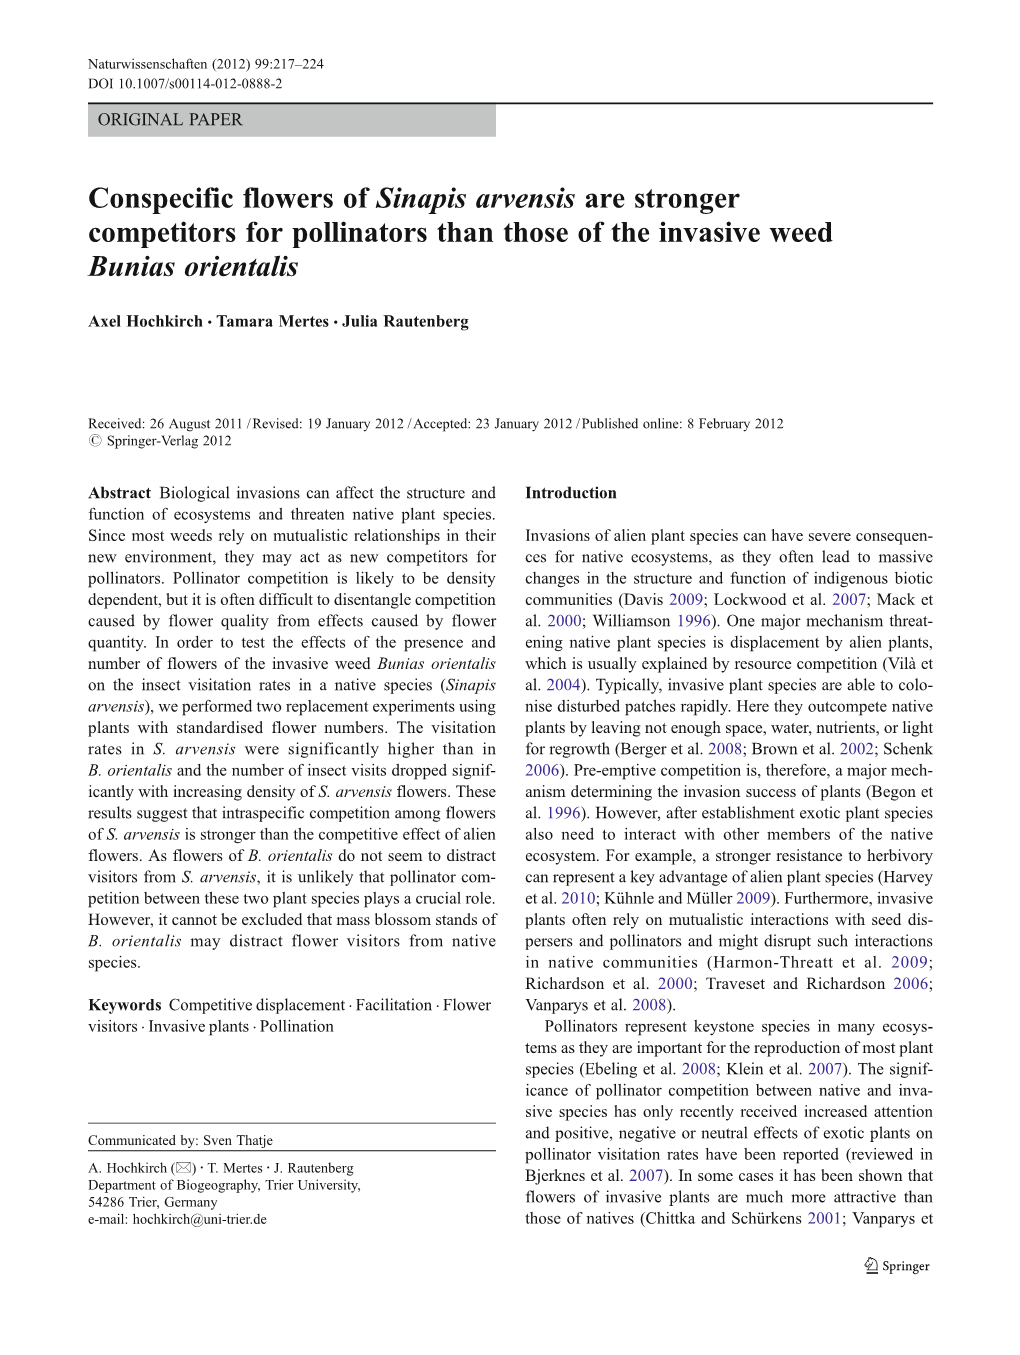 Conspecific Flowers of Sinapis Arvensis Are Stronger Competitors for Pollinators Than Those of the Invasive Weed Bunias Orientalis